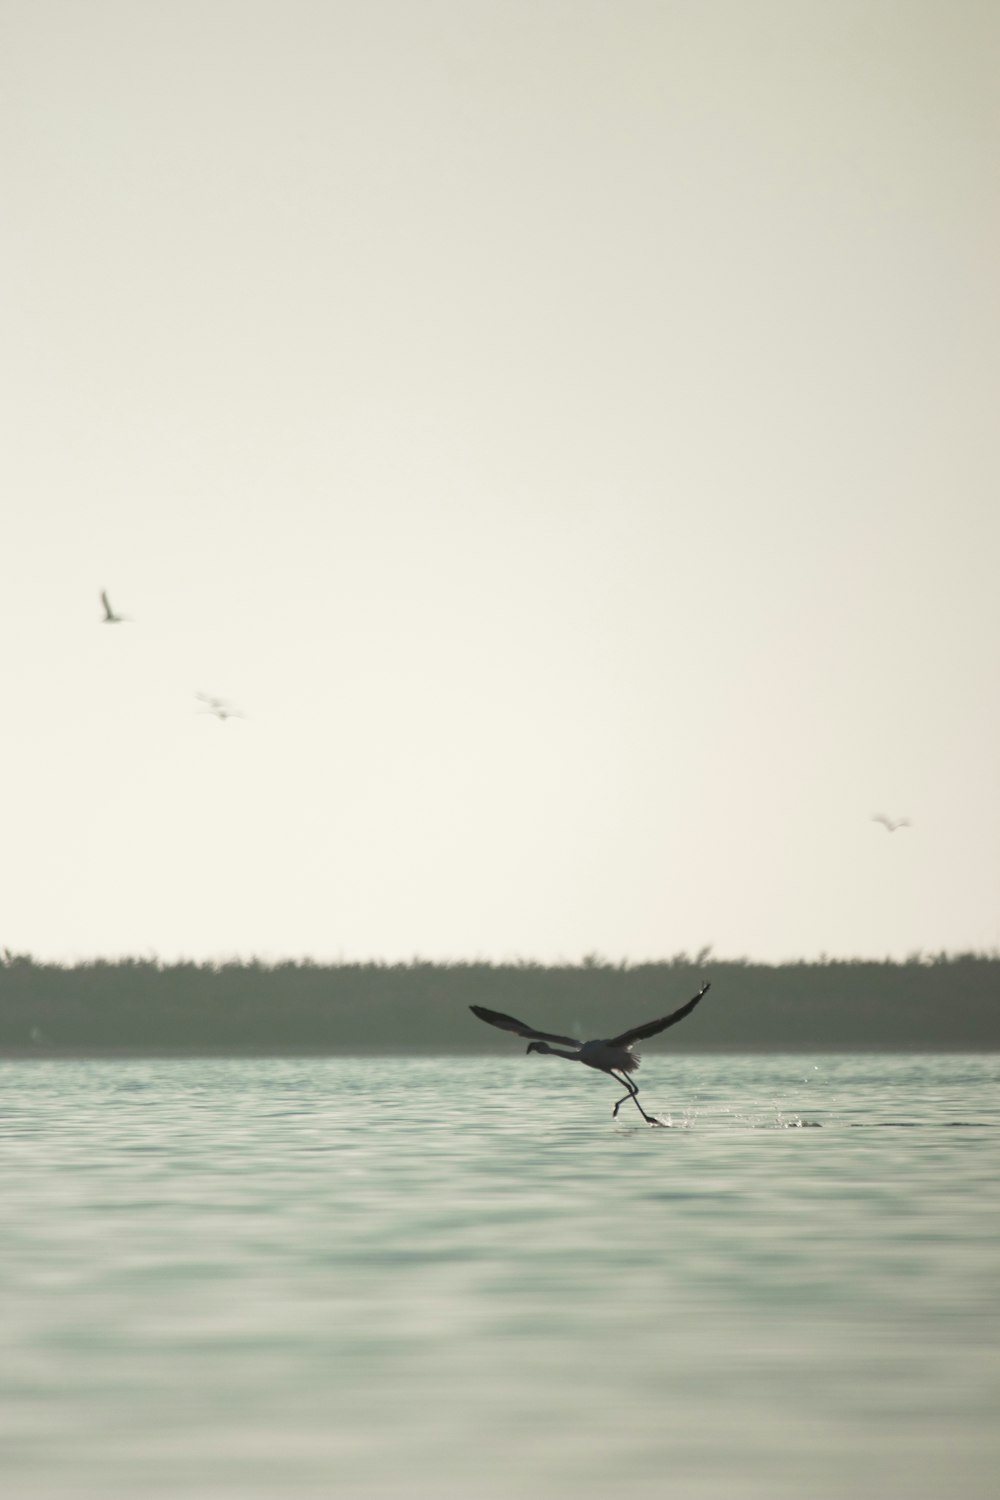 a large bird flying over a large body of water